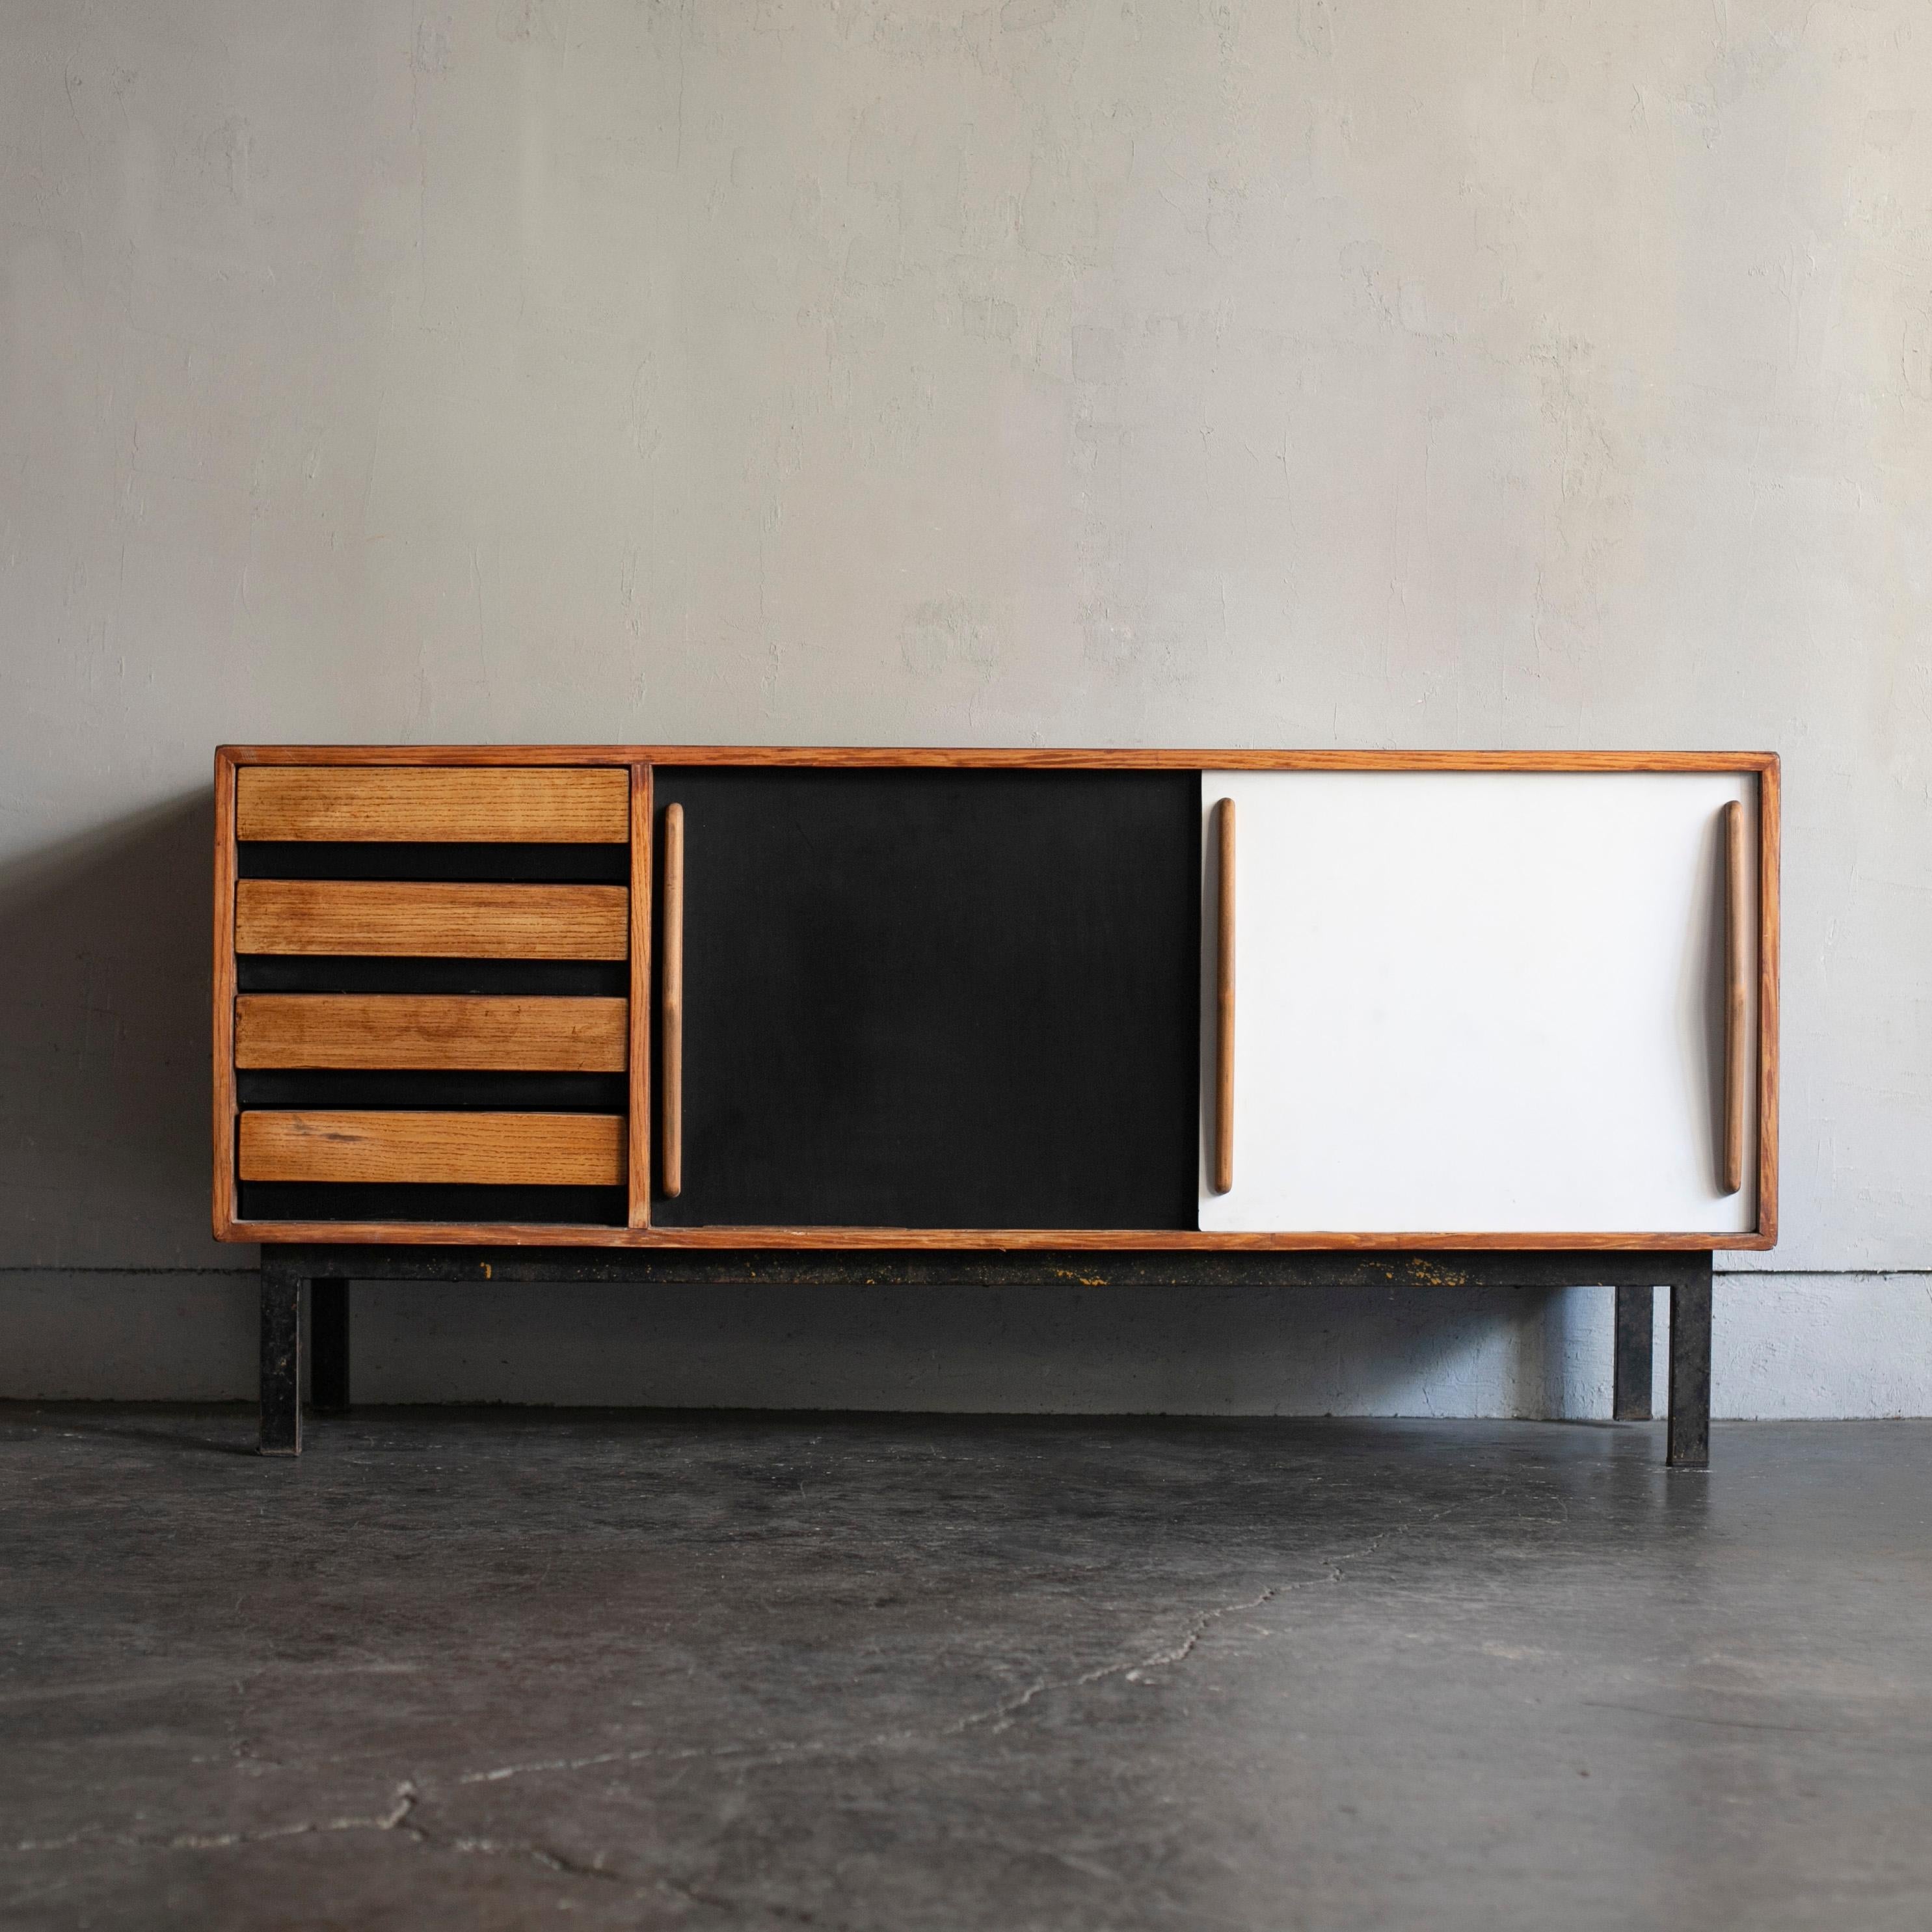 Sideboard designed by Charlotte Perriand for Cite Cansado, Mauritania.
Edited by Steph Simon.